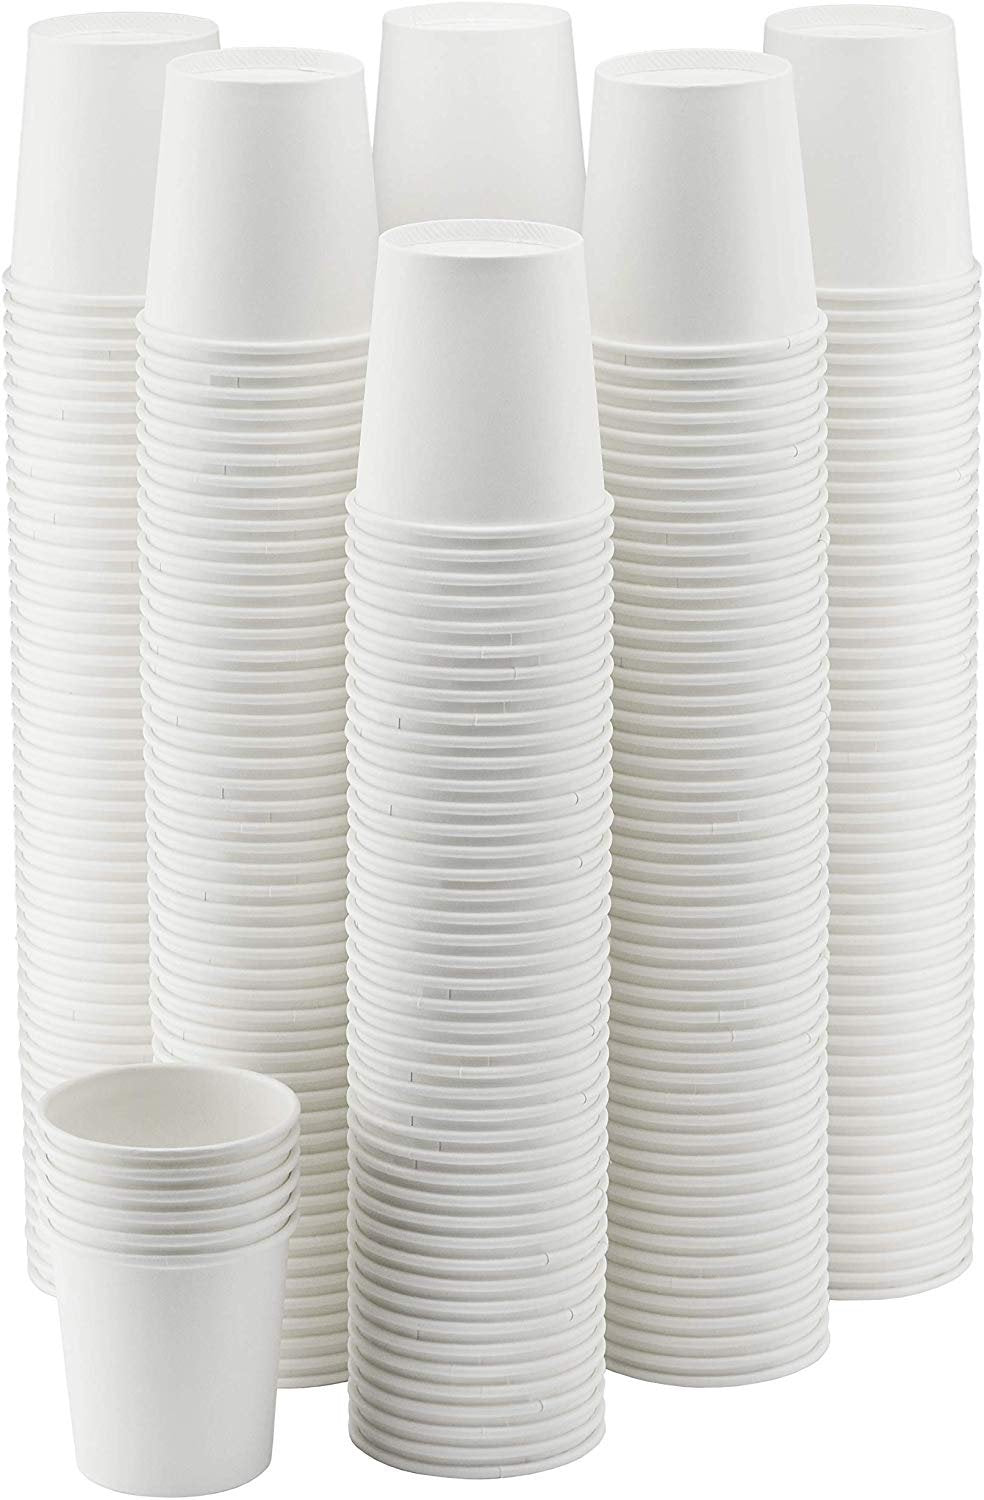 LITOPAK 500 Pack 4 oz Paper Cups, Disposable Coffee Cups, White Espresso  Cups, Hot/Cold Beverage Drinking Cups for Party, Picnic, and Travel. -  Yahoo Shopping